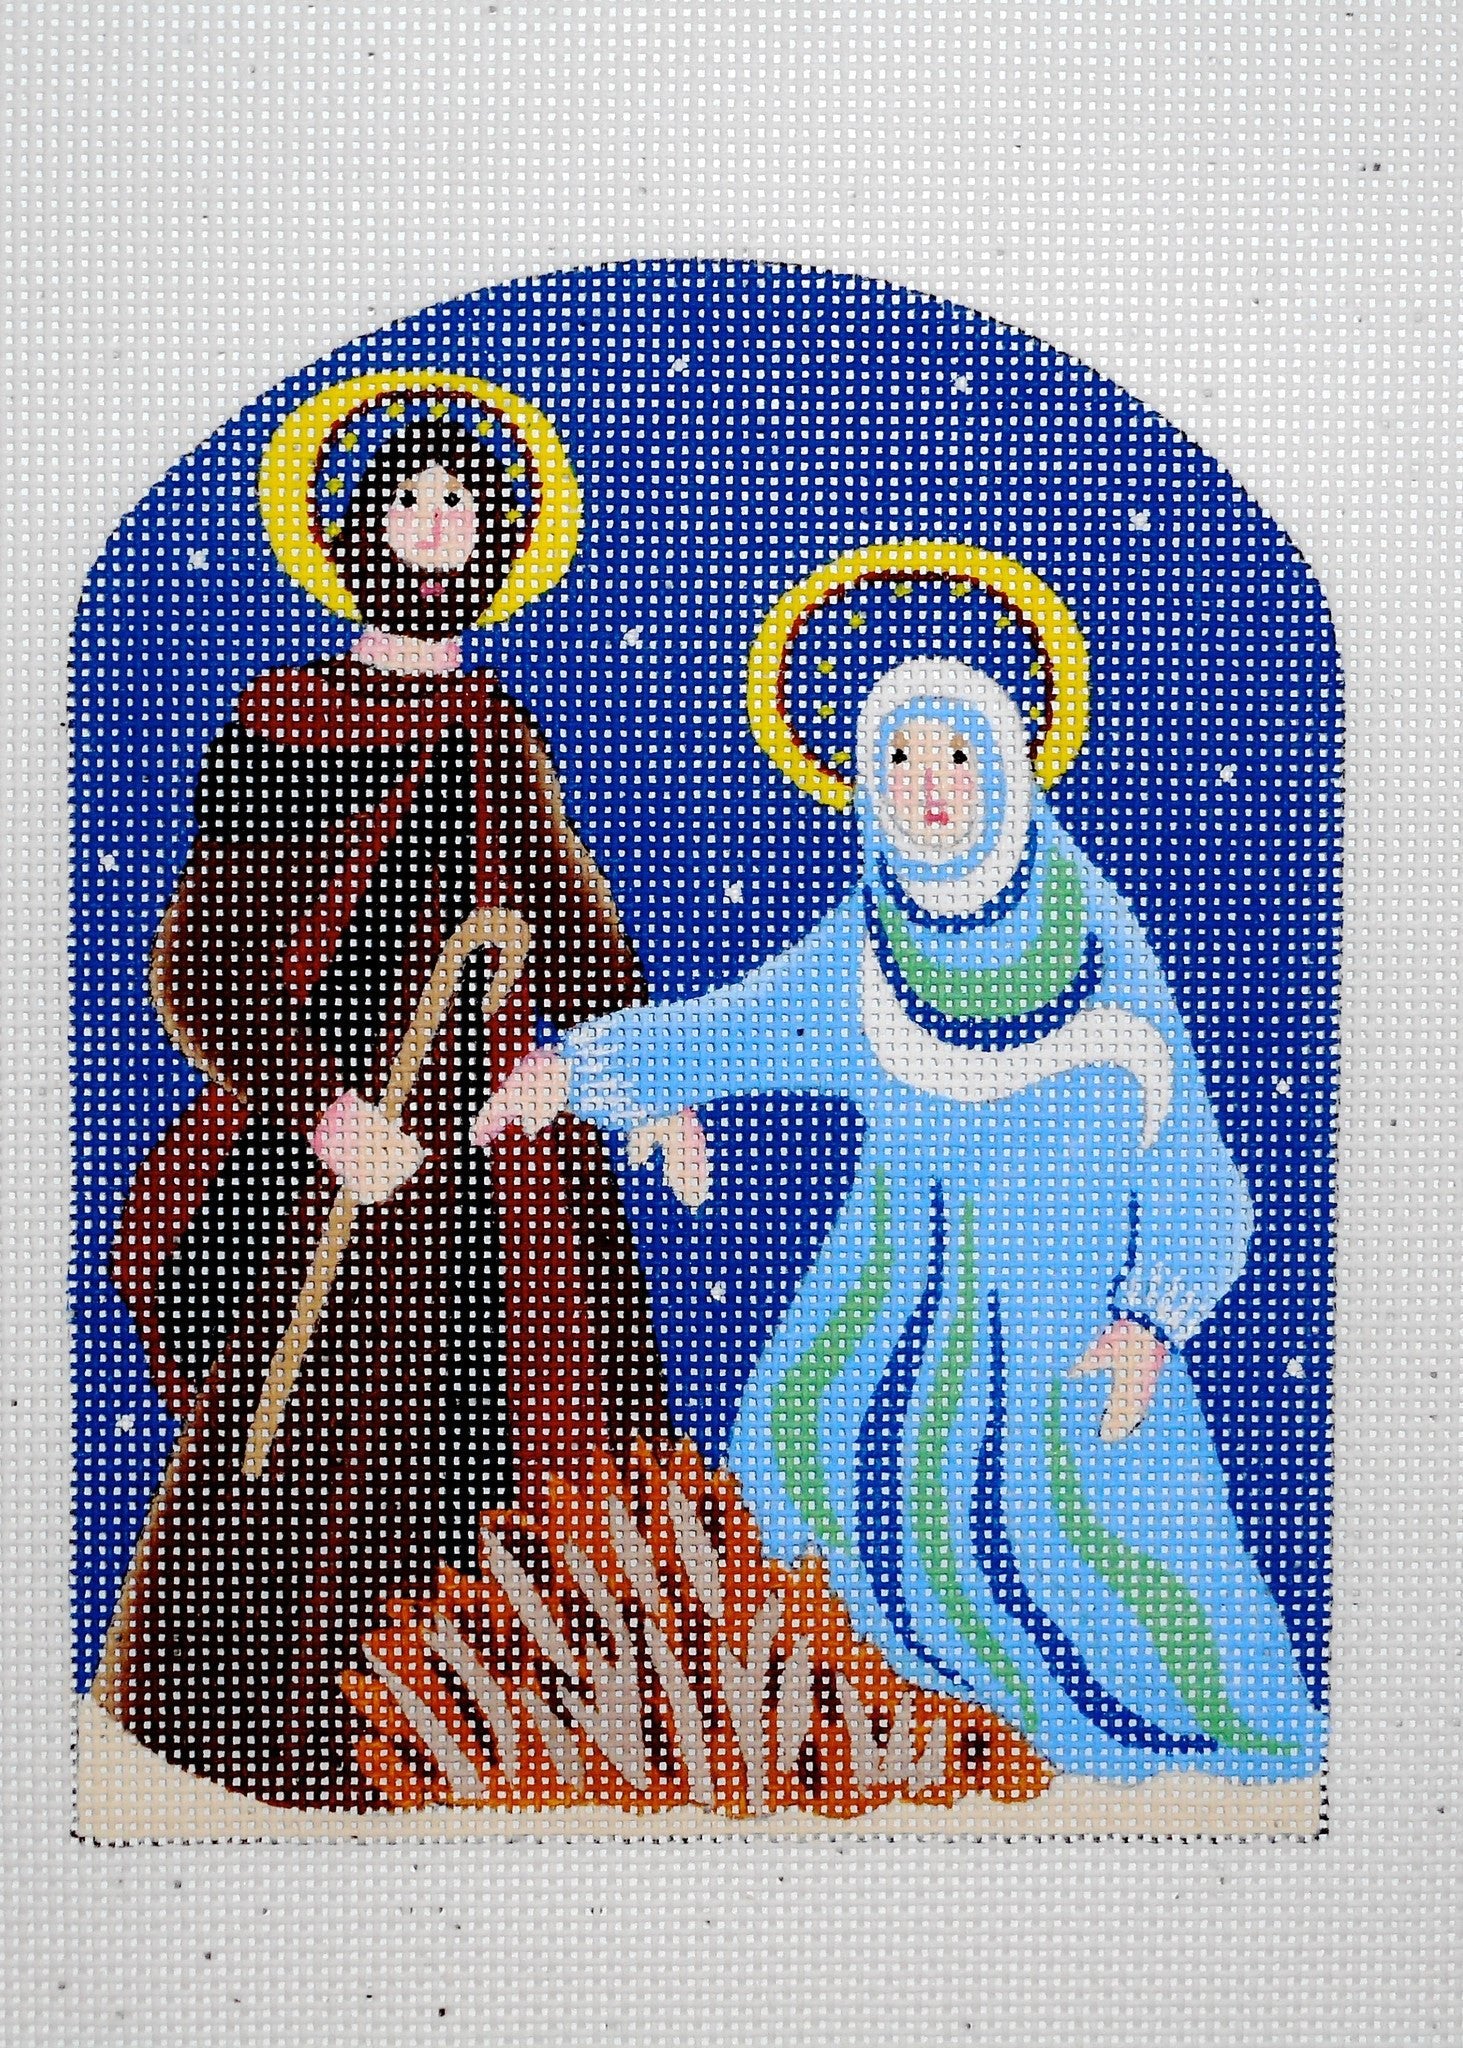 Holy Family- Mary and Joseph- by Melissa Shirley - The Flying Needles